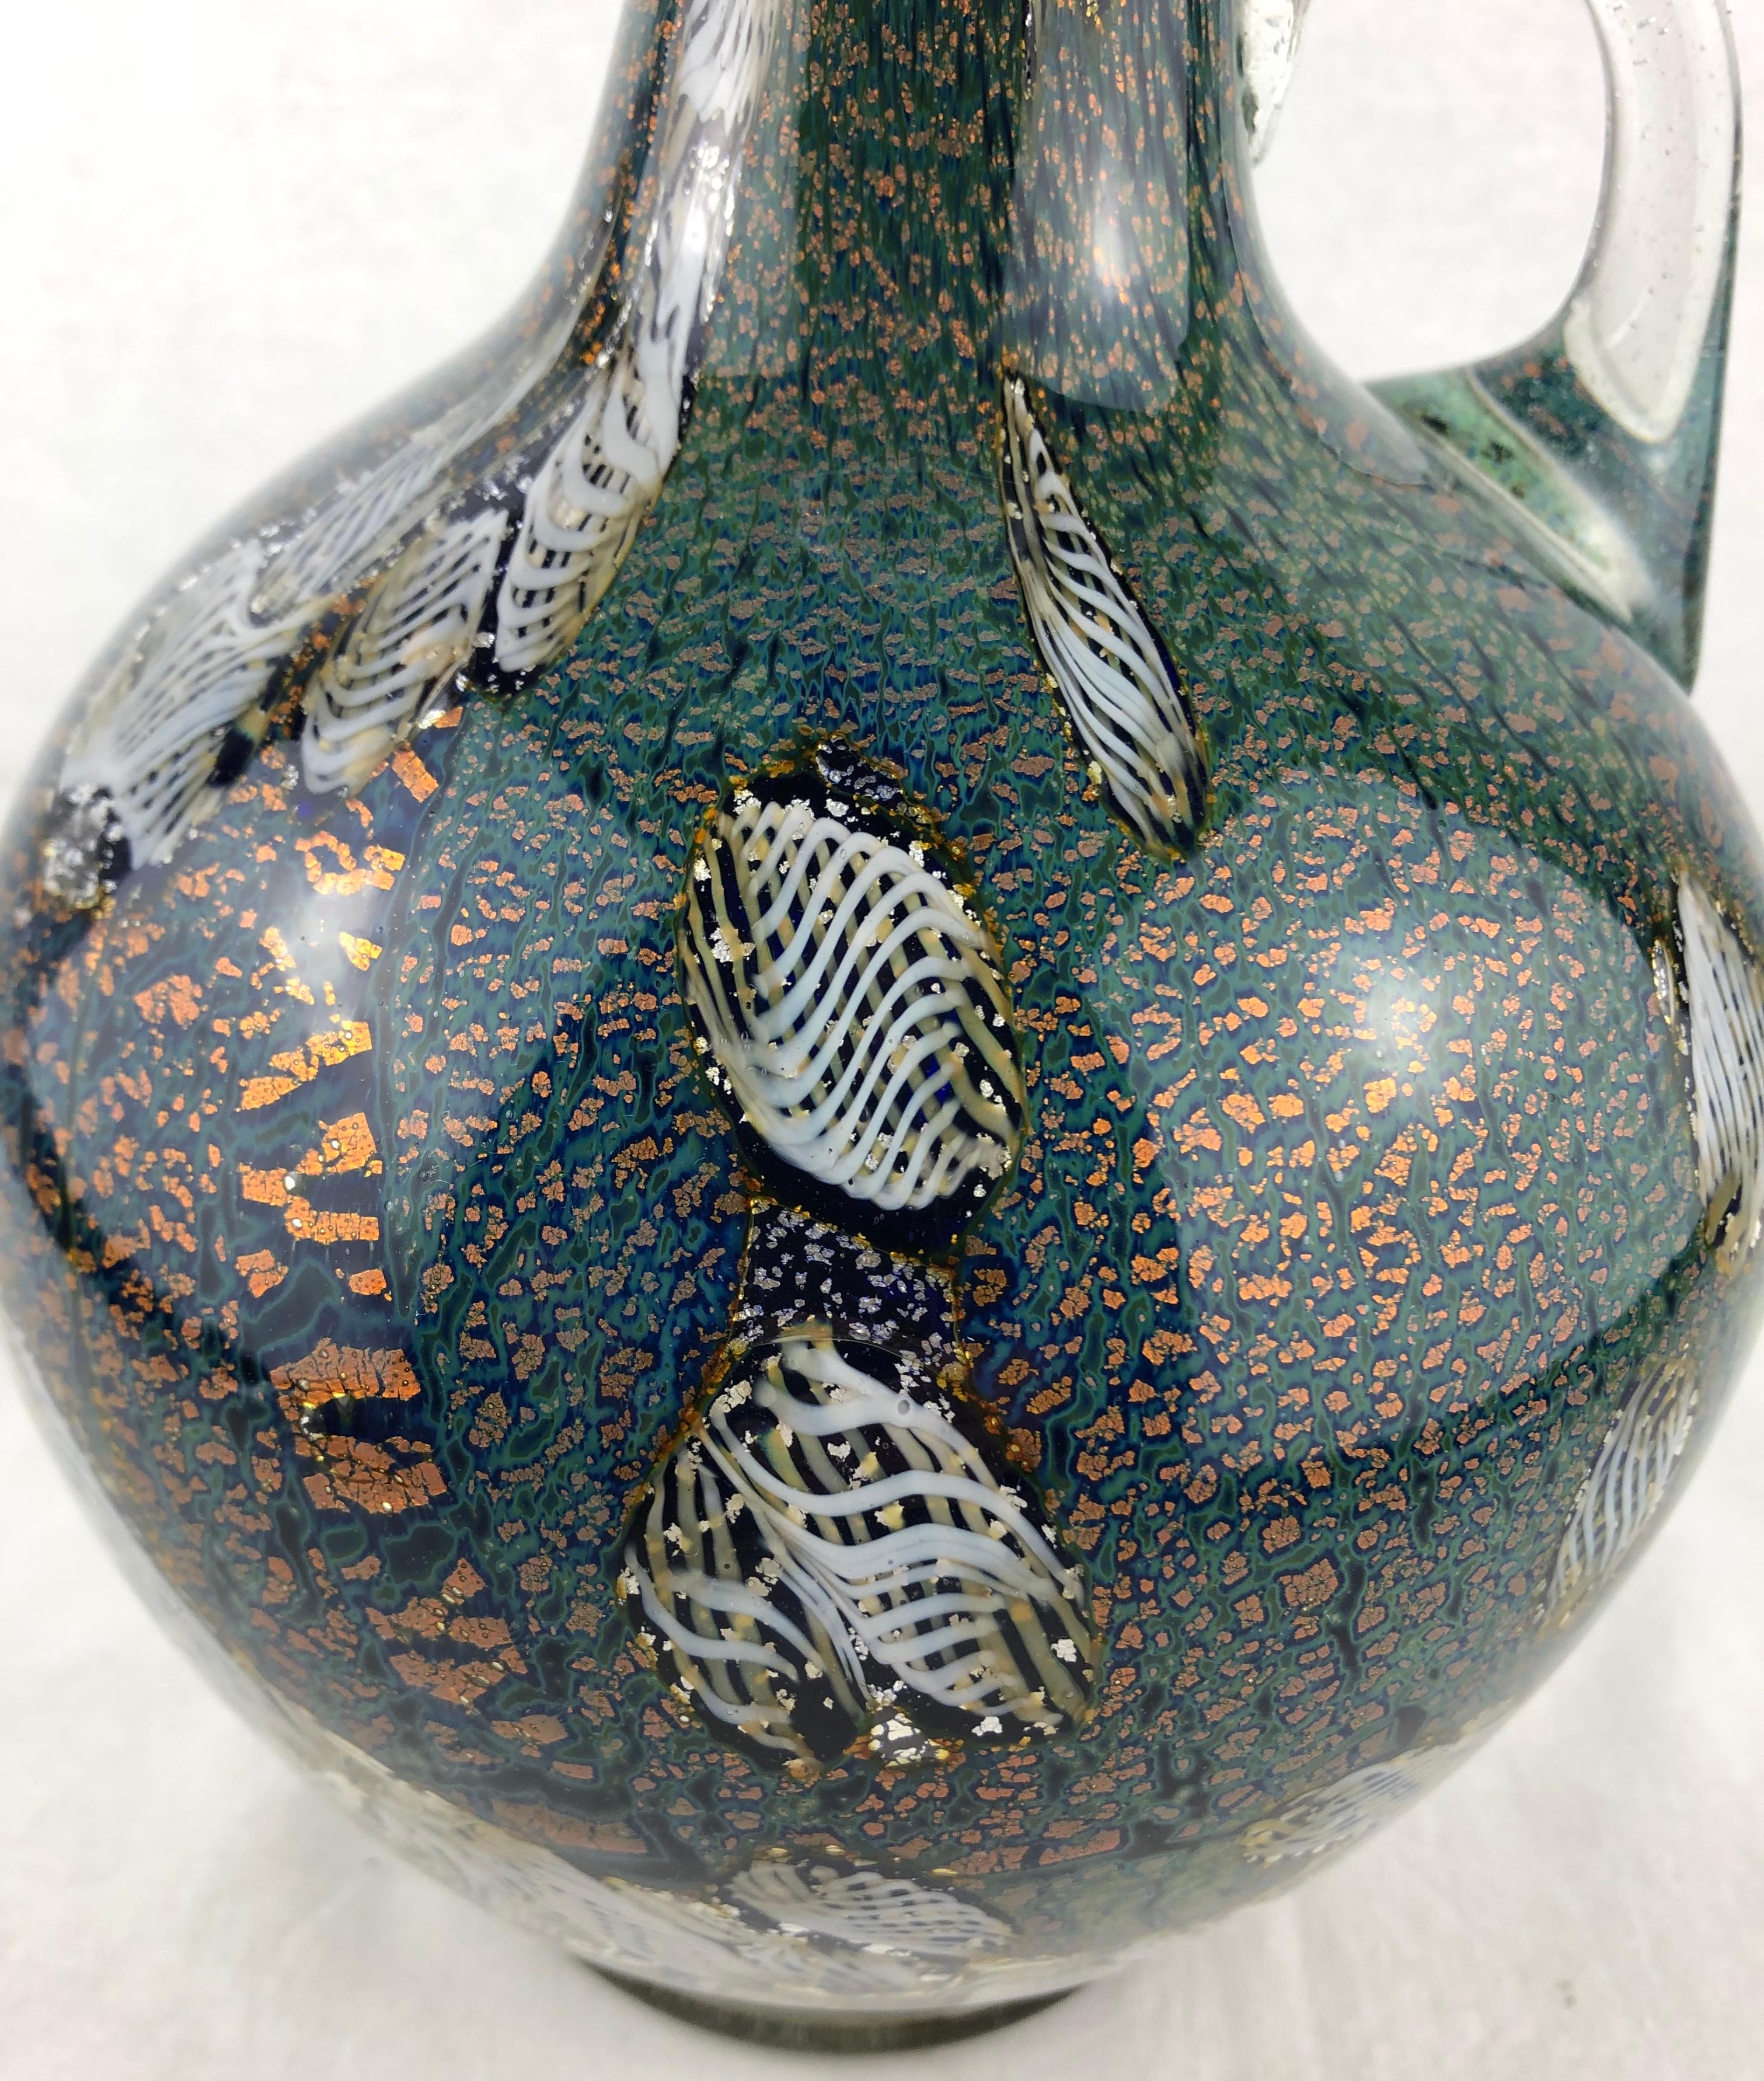 A unique hand blow jar or vase by Michele Luzoro, known as the 